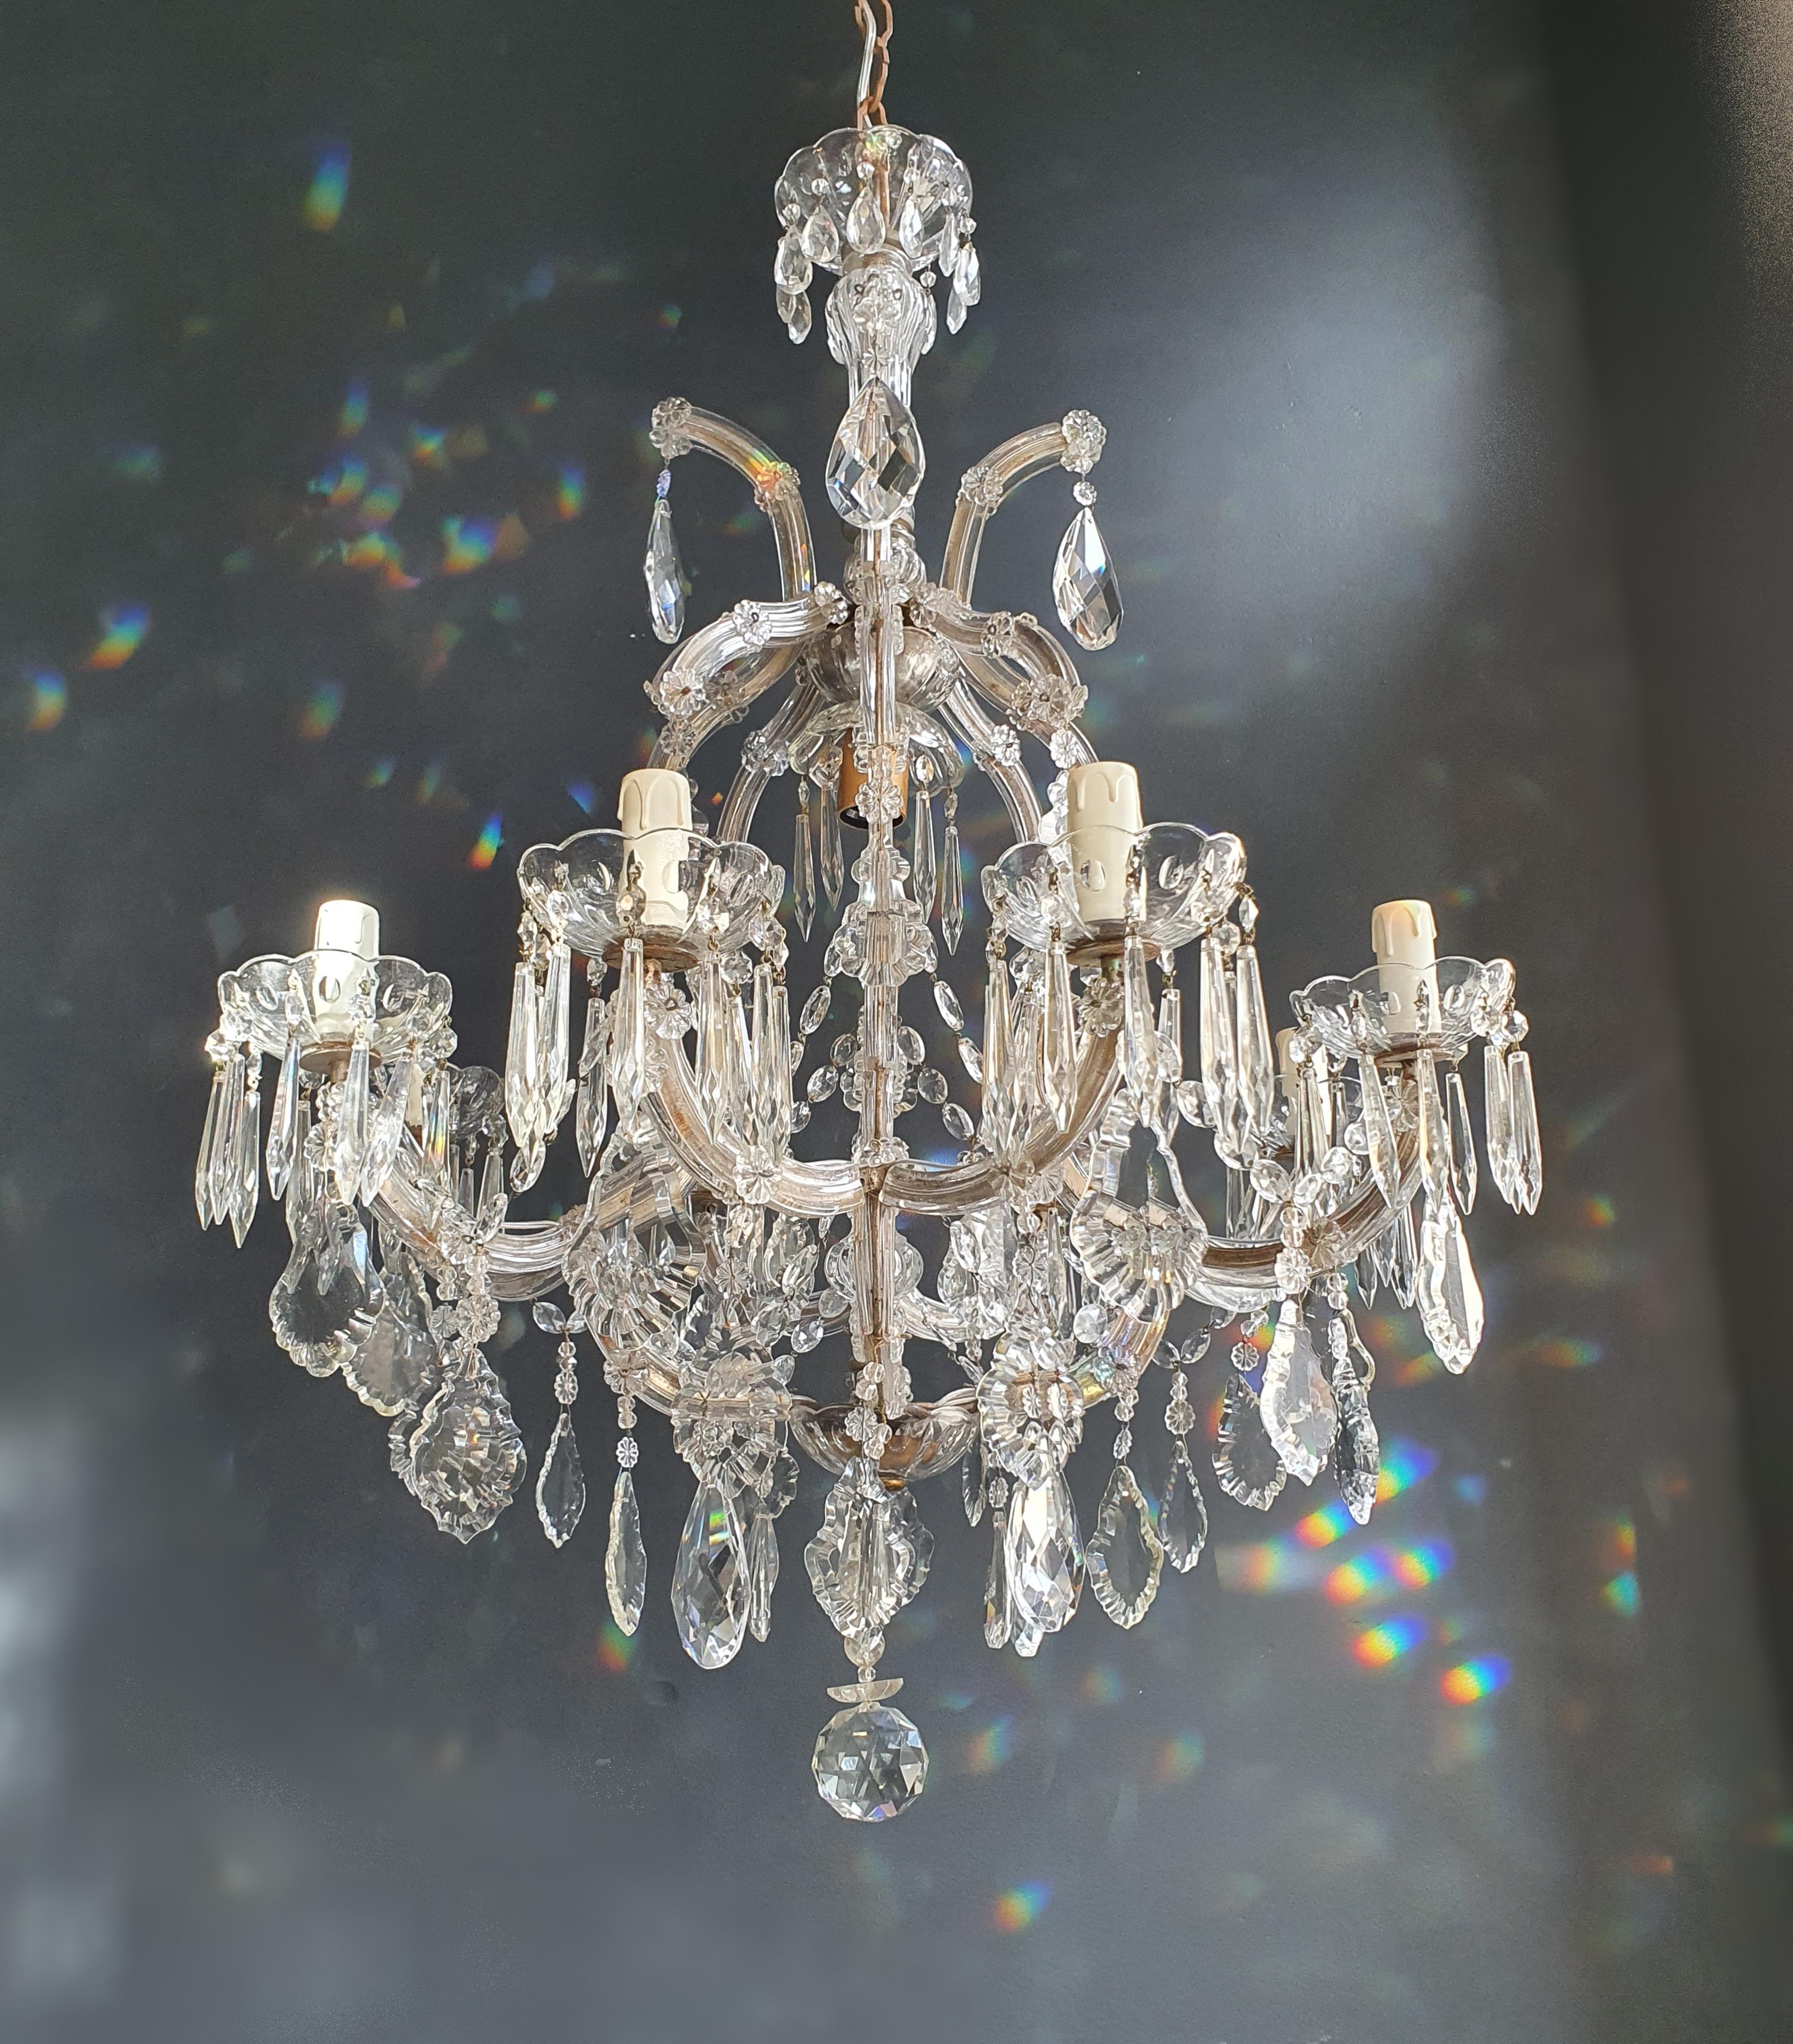 Maria Theresa Crystal Chandelier Antique Classic Clear Glass 4